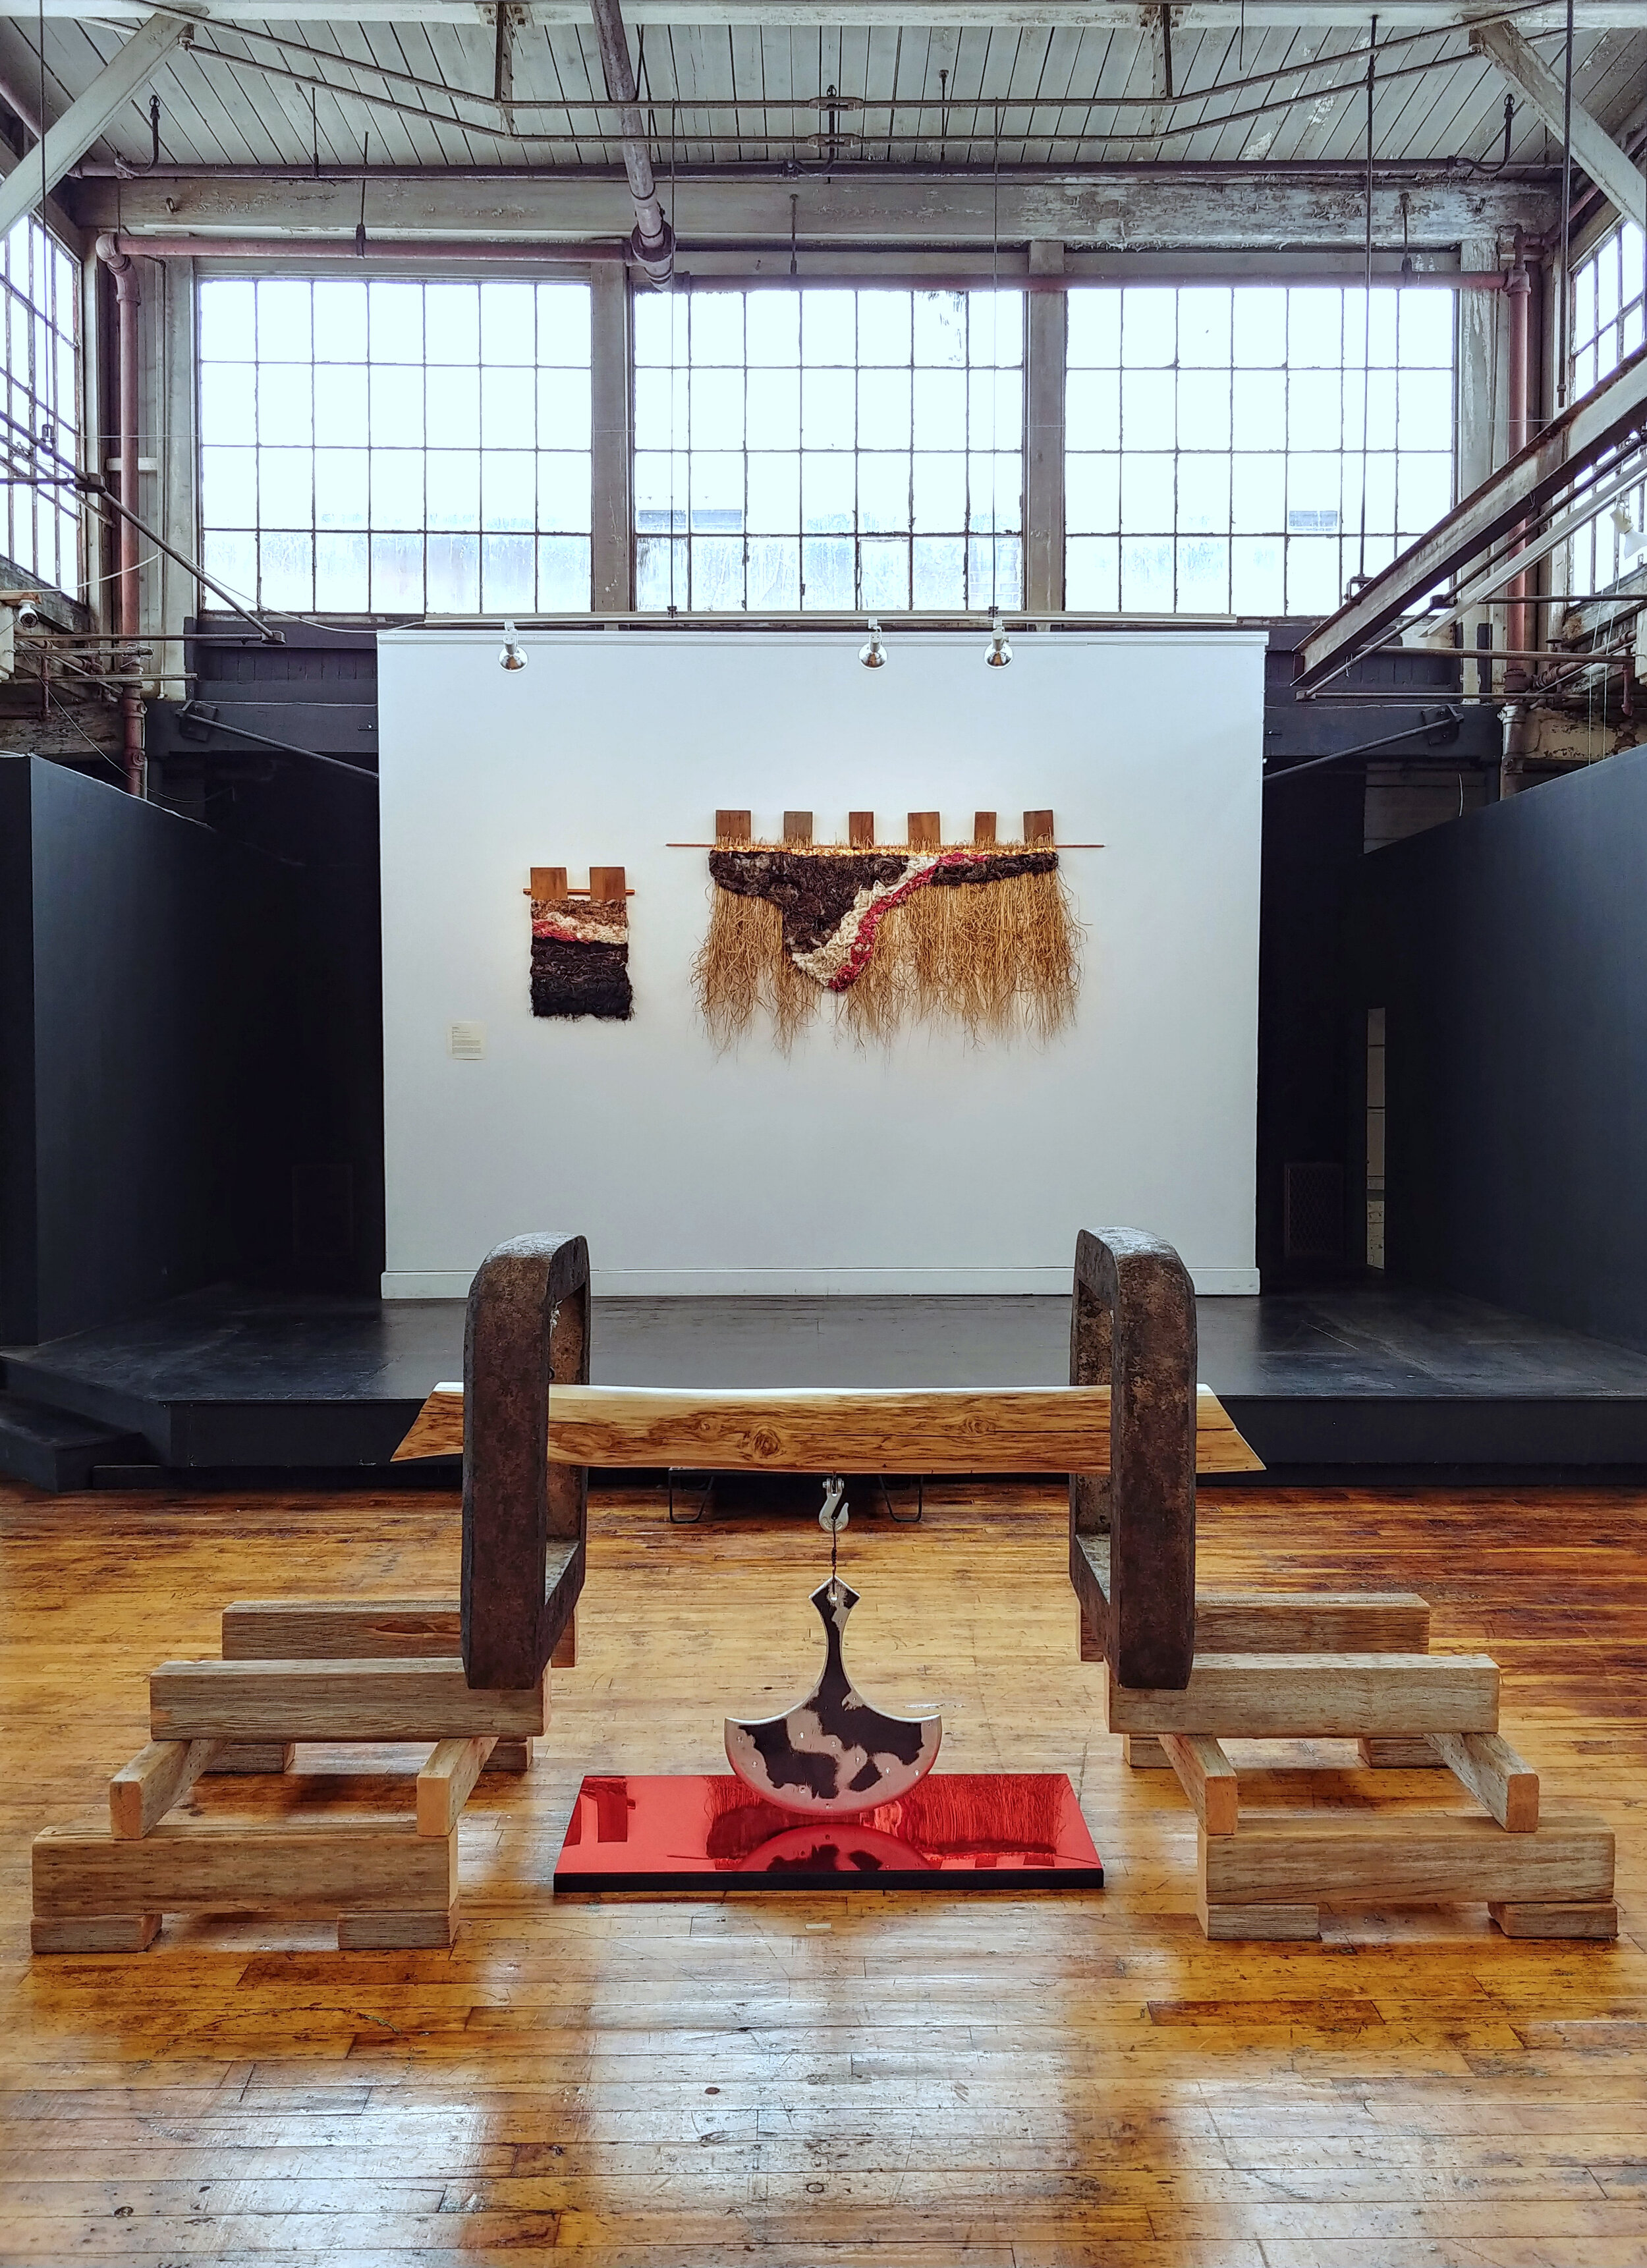  Installation view at Sprinkler Factory 